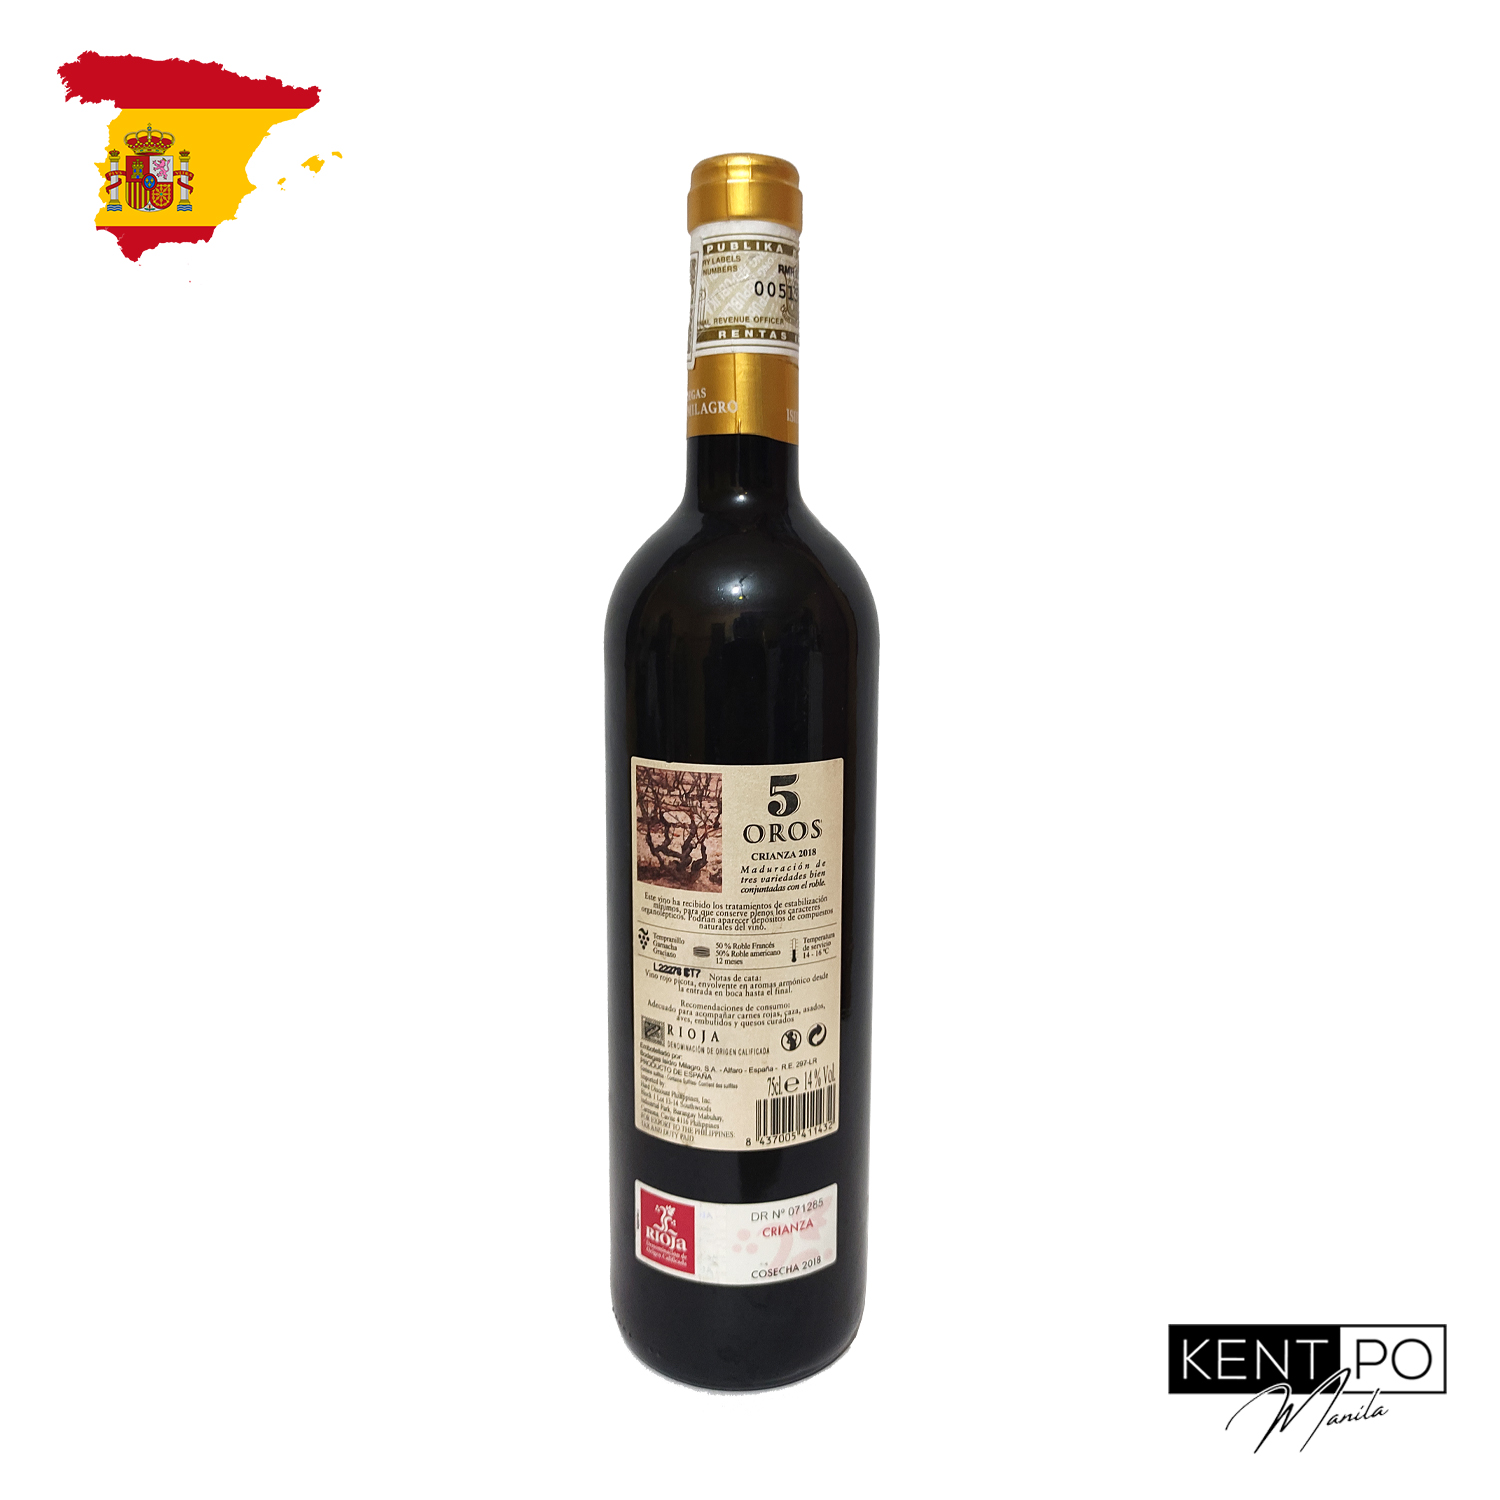 BODEGAS CRIANZA IMPORTED ISIDRO SPAIN MILAGRO 5 OROS Lazada | RED PRODUCT 75cl OF 2018 WINE PH